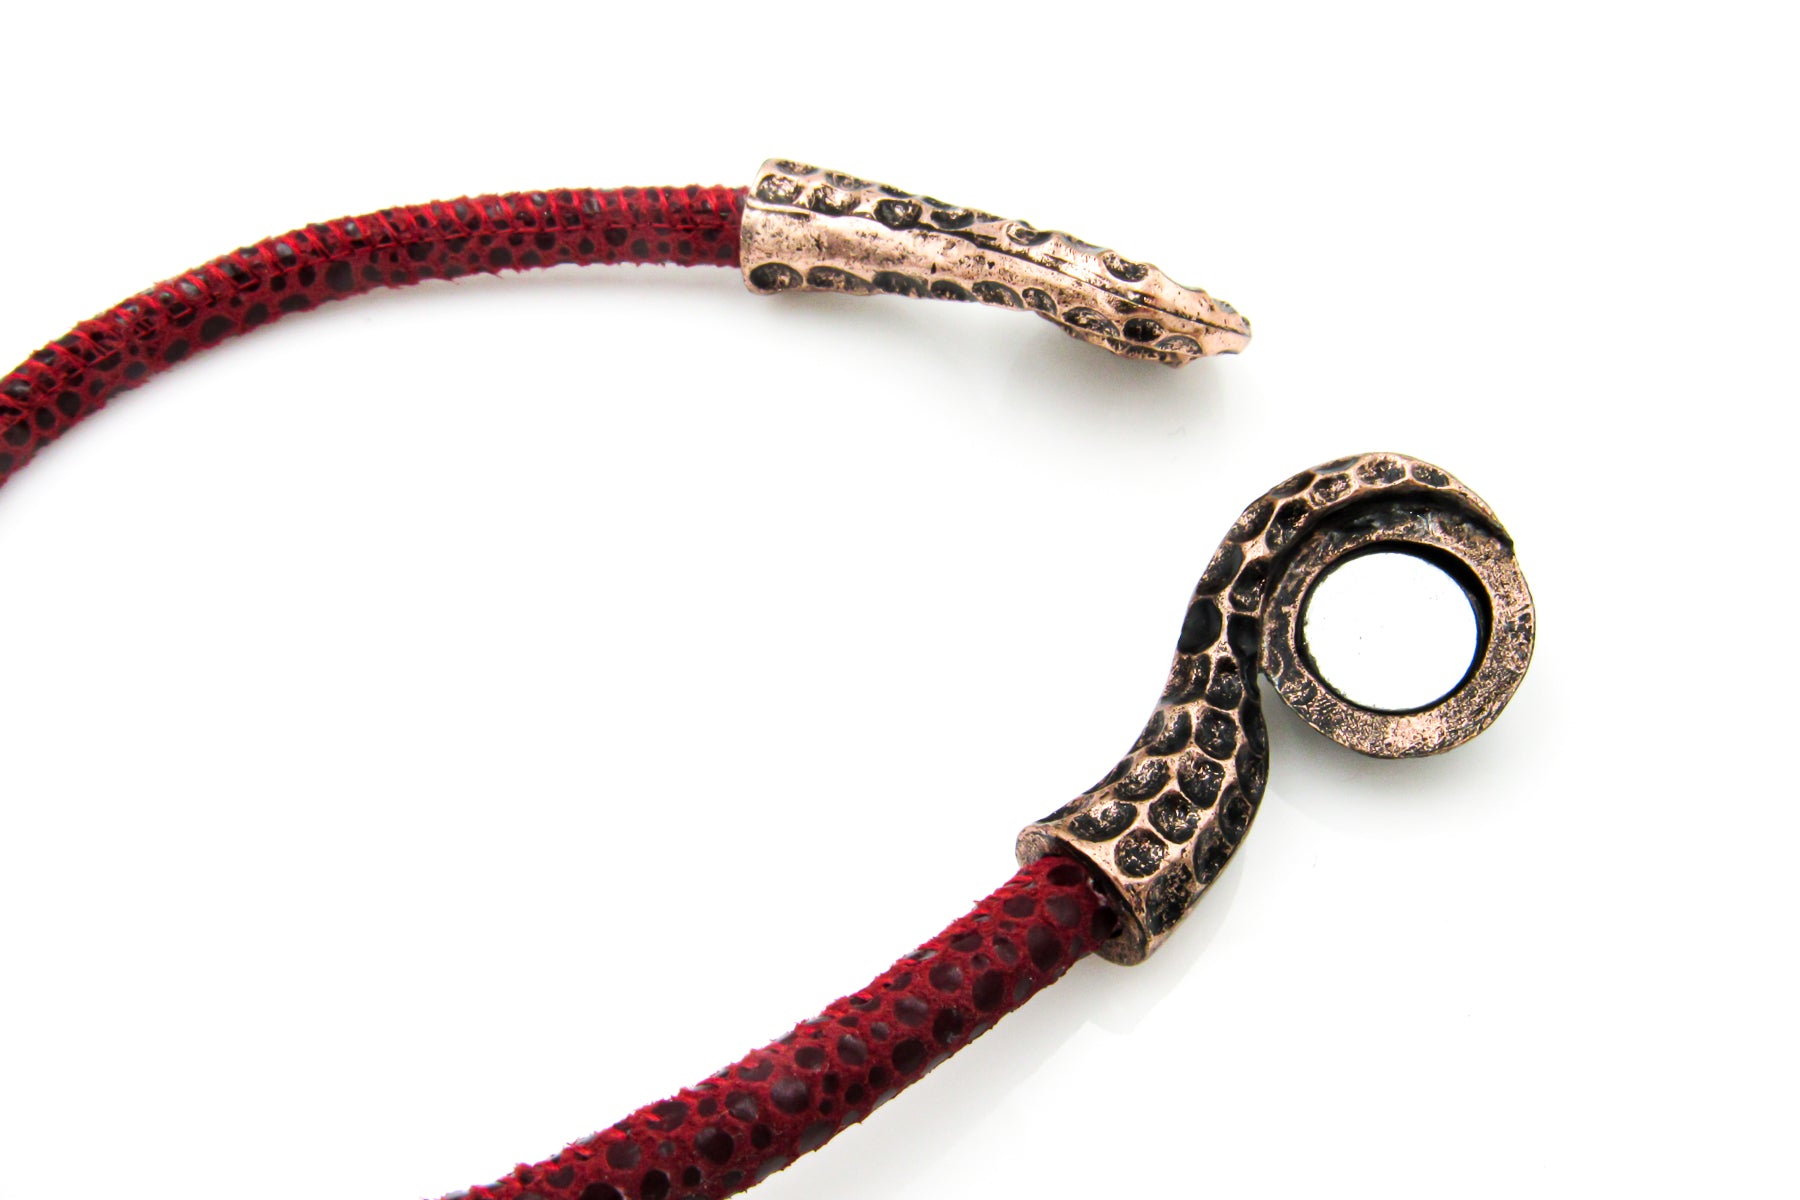 Magnetic Tentacle Clasp Red Patterned Suede Bracelet